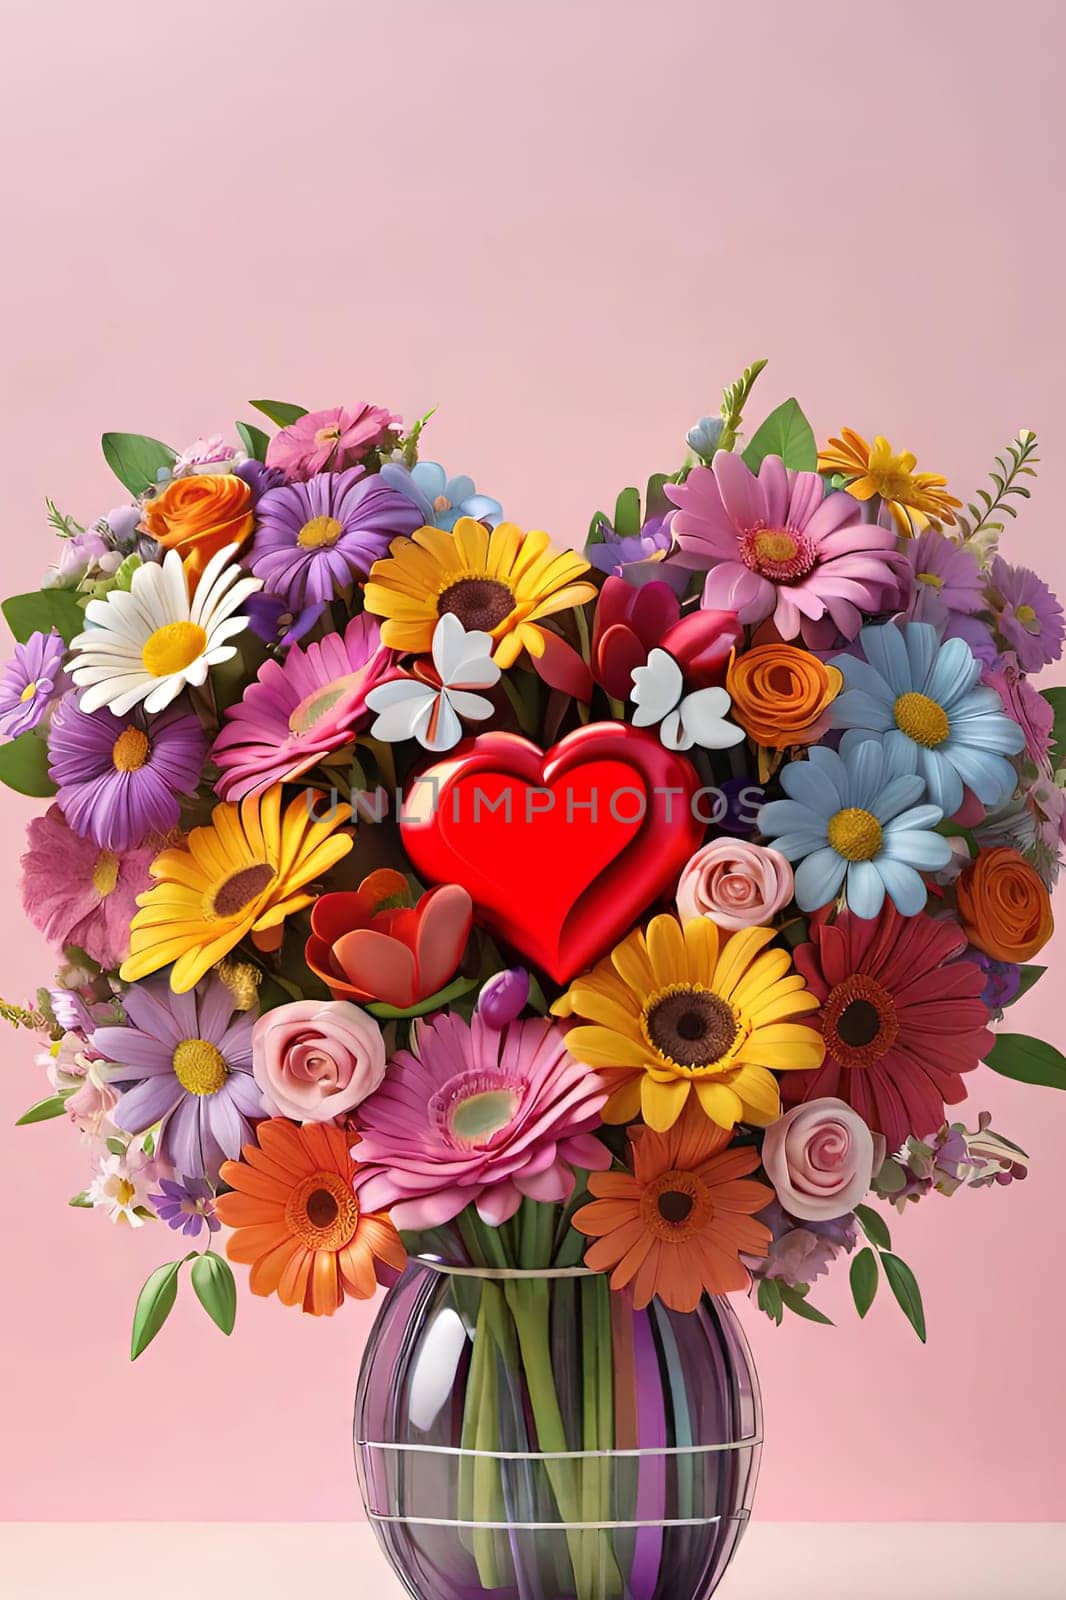 Colorful bouquet of flowers in a vase on background. by yilmazsavaskandag